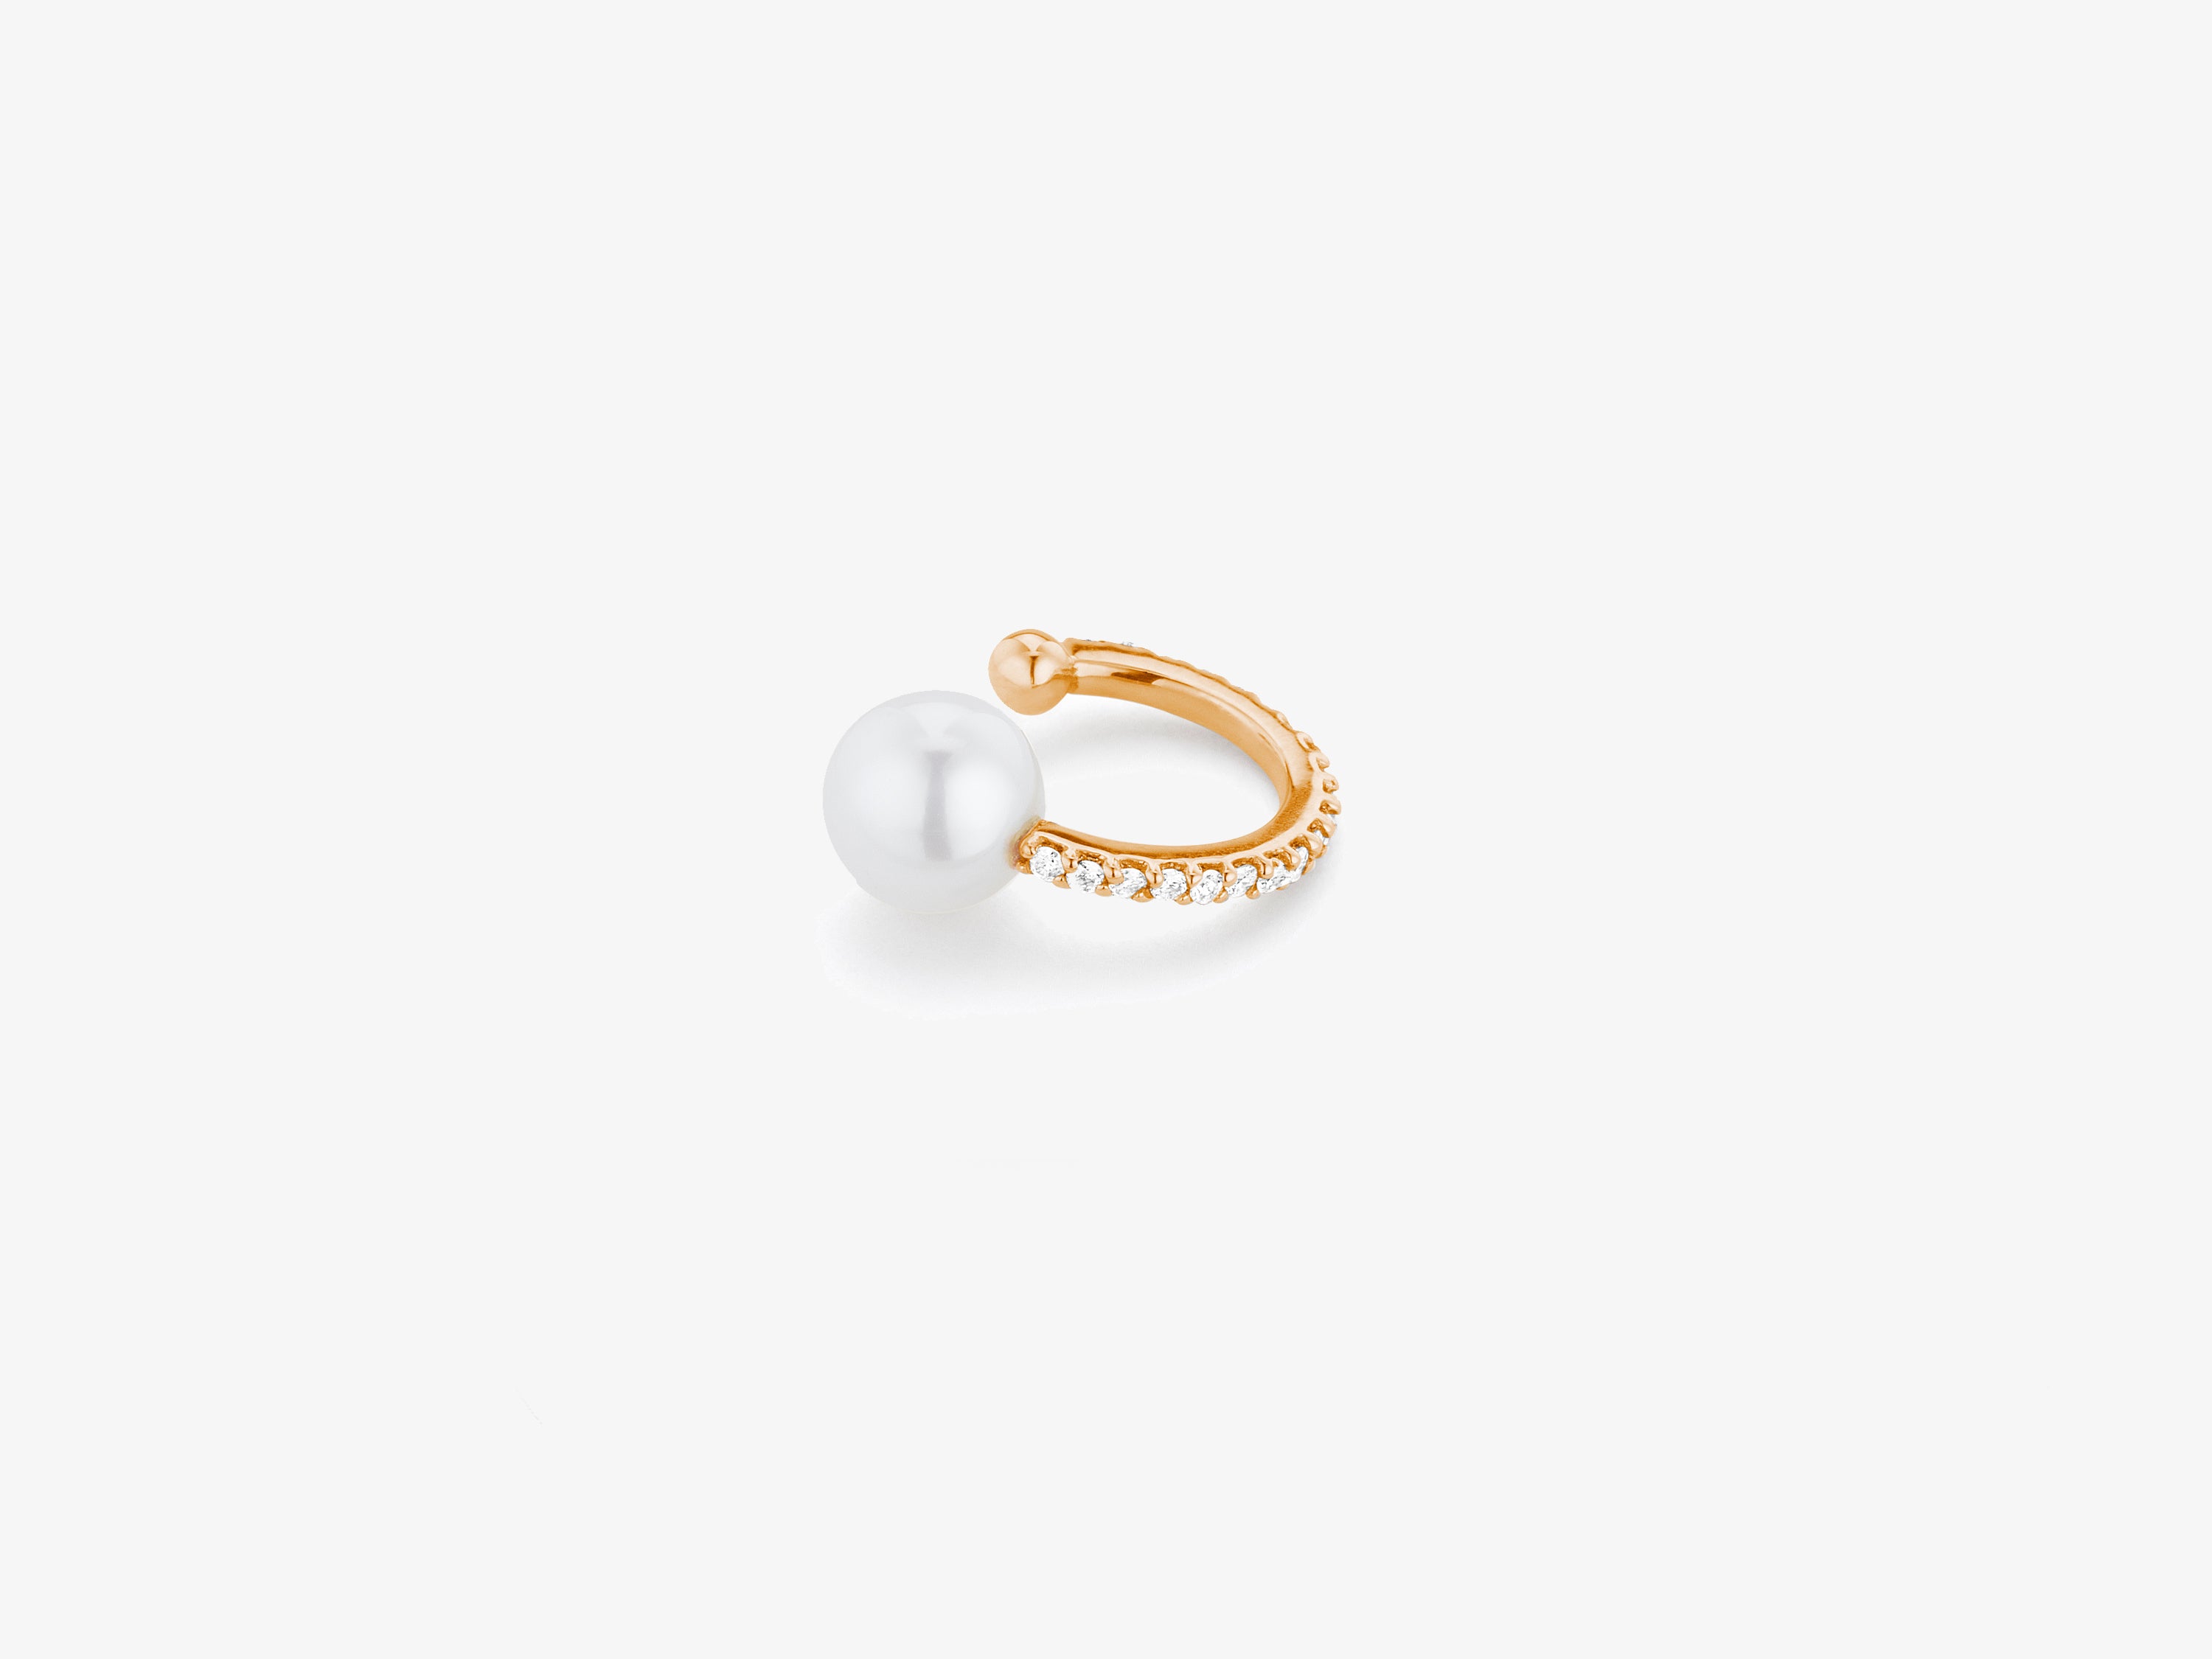 TPLT Pearl and Ball Ear Cuff with Diamond Pave